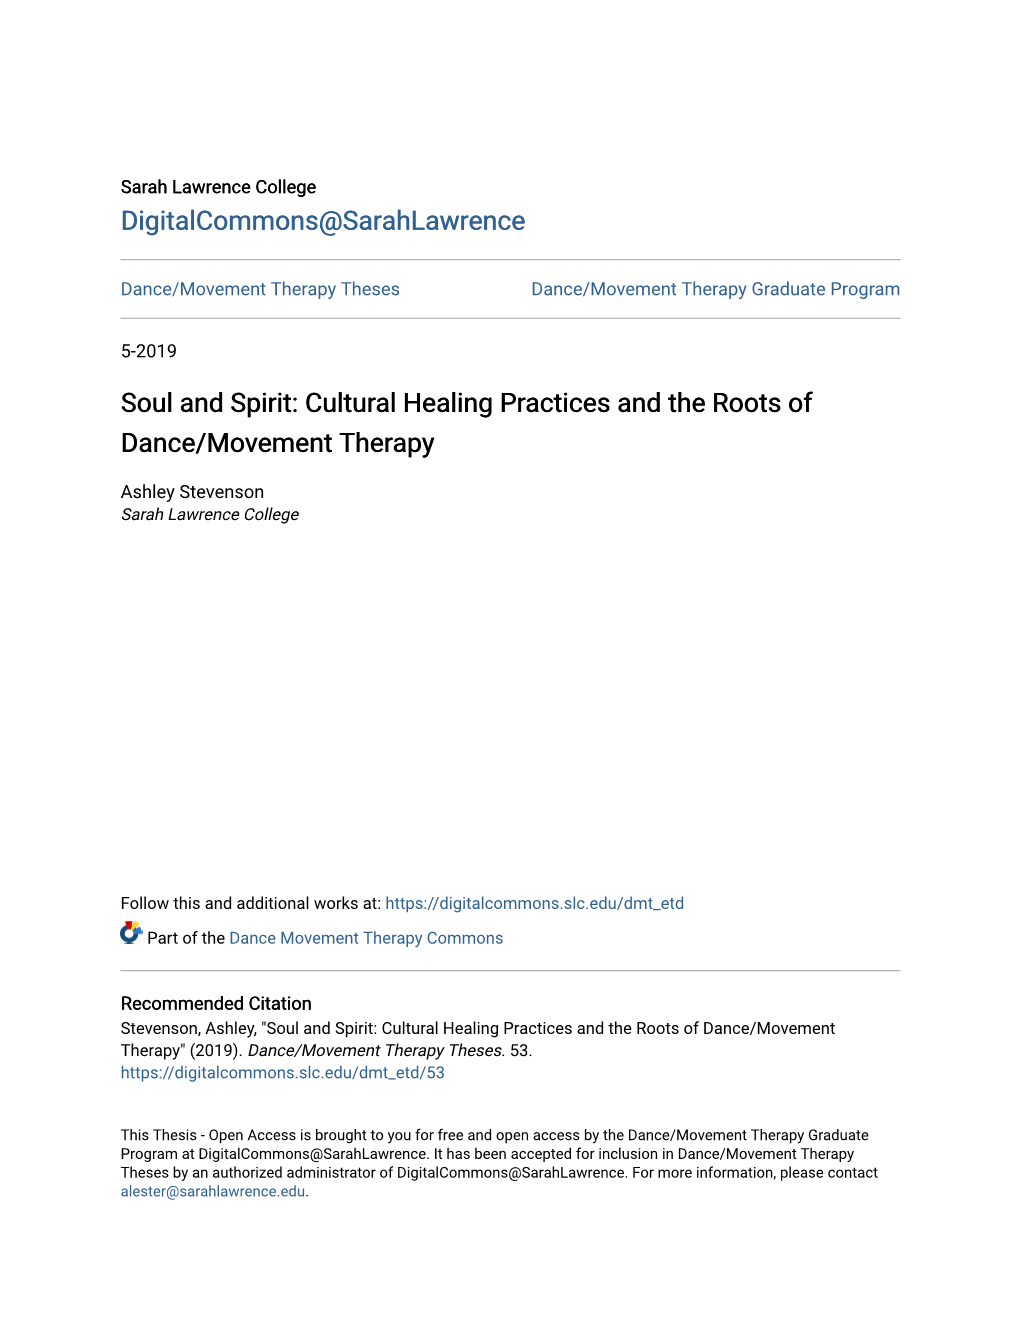 Cultural Healing Practices and the Roots of Dance/Movement Therapy